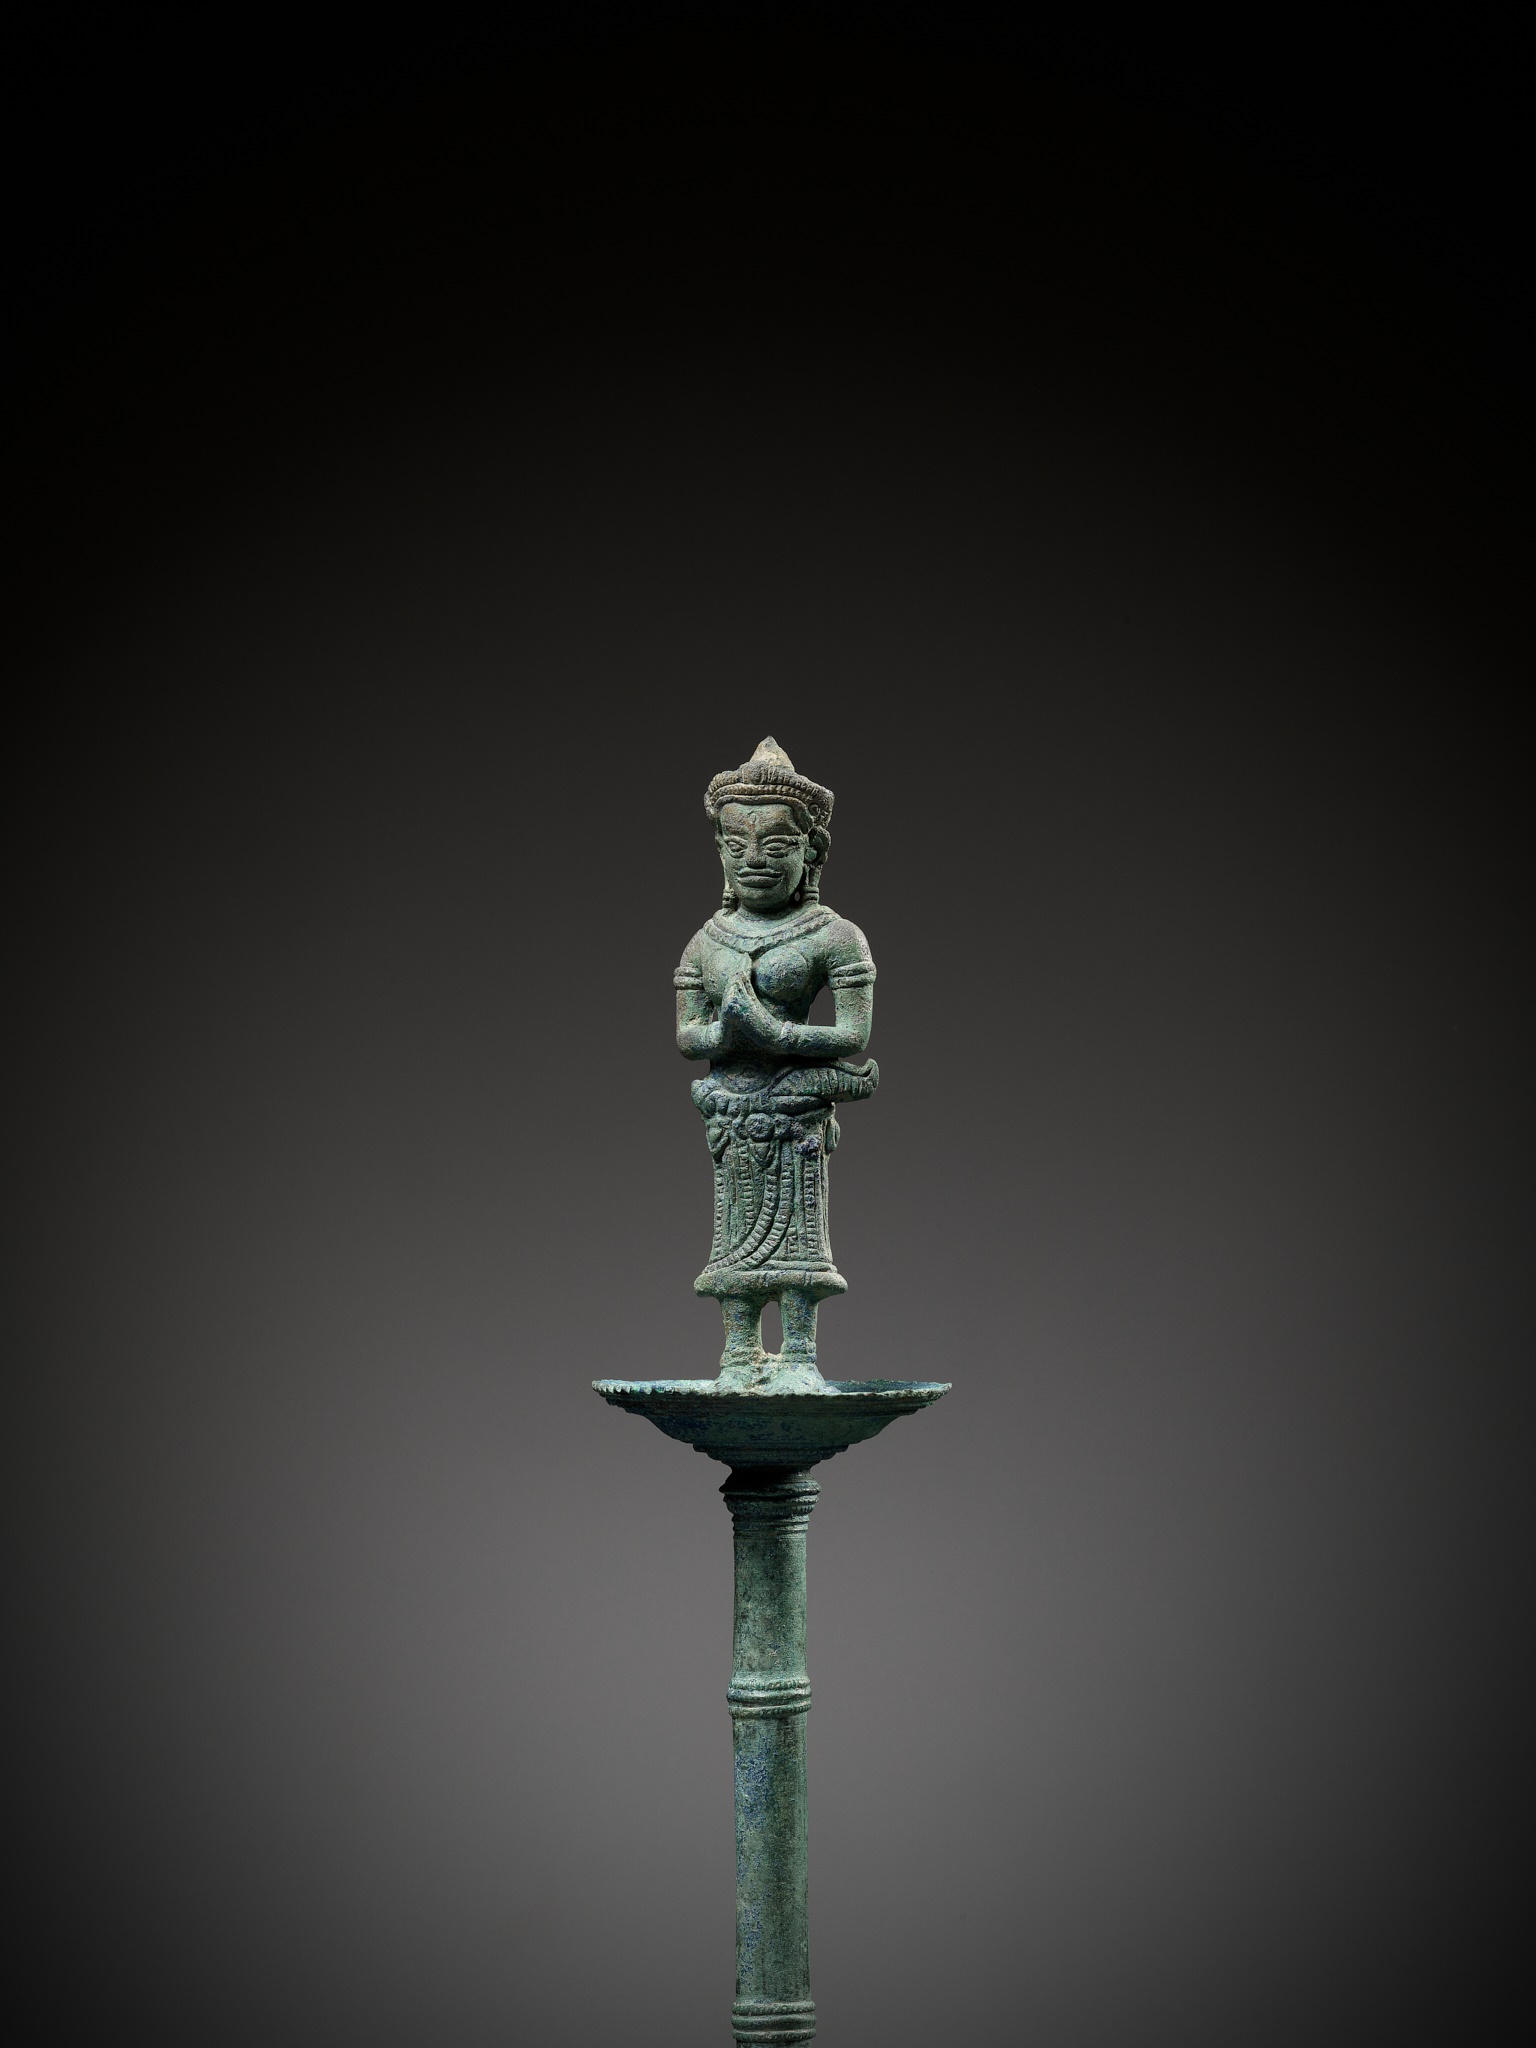 A KHMER BRONZE FITTING WITH A FIGURE OF A FEMALE DEITY, ANGKOR PERIOD - Image 4 of 15